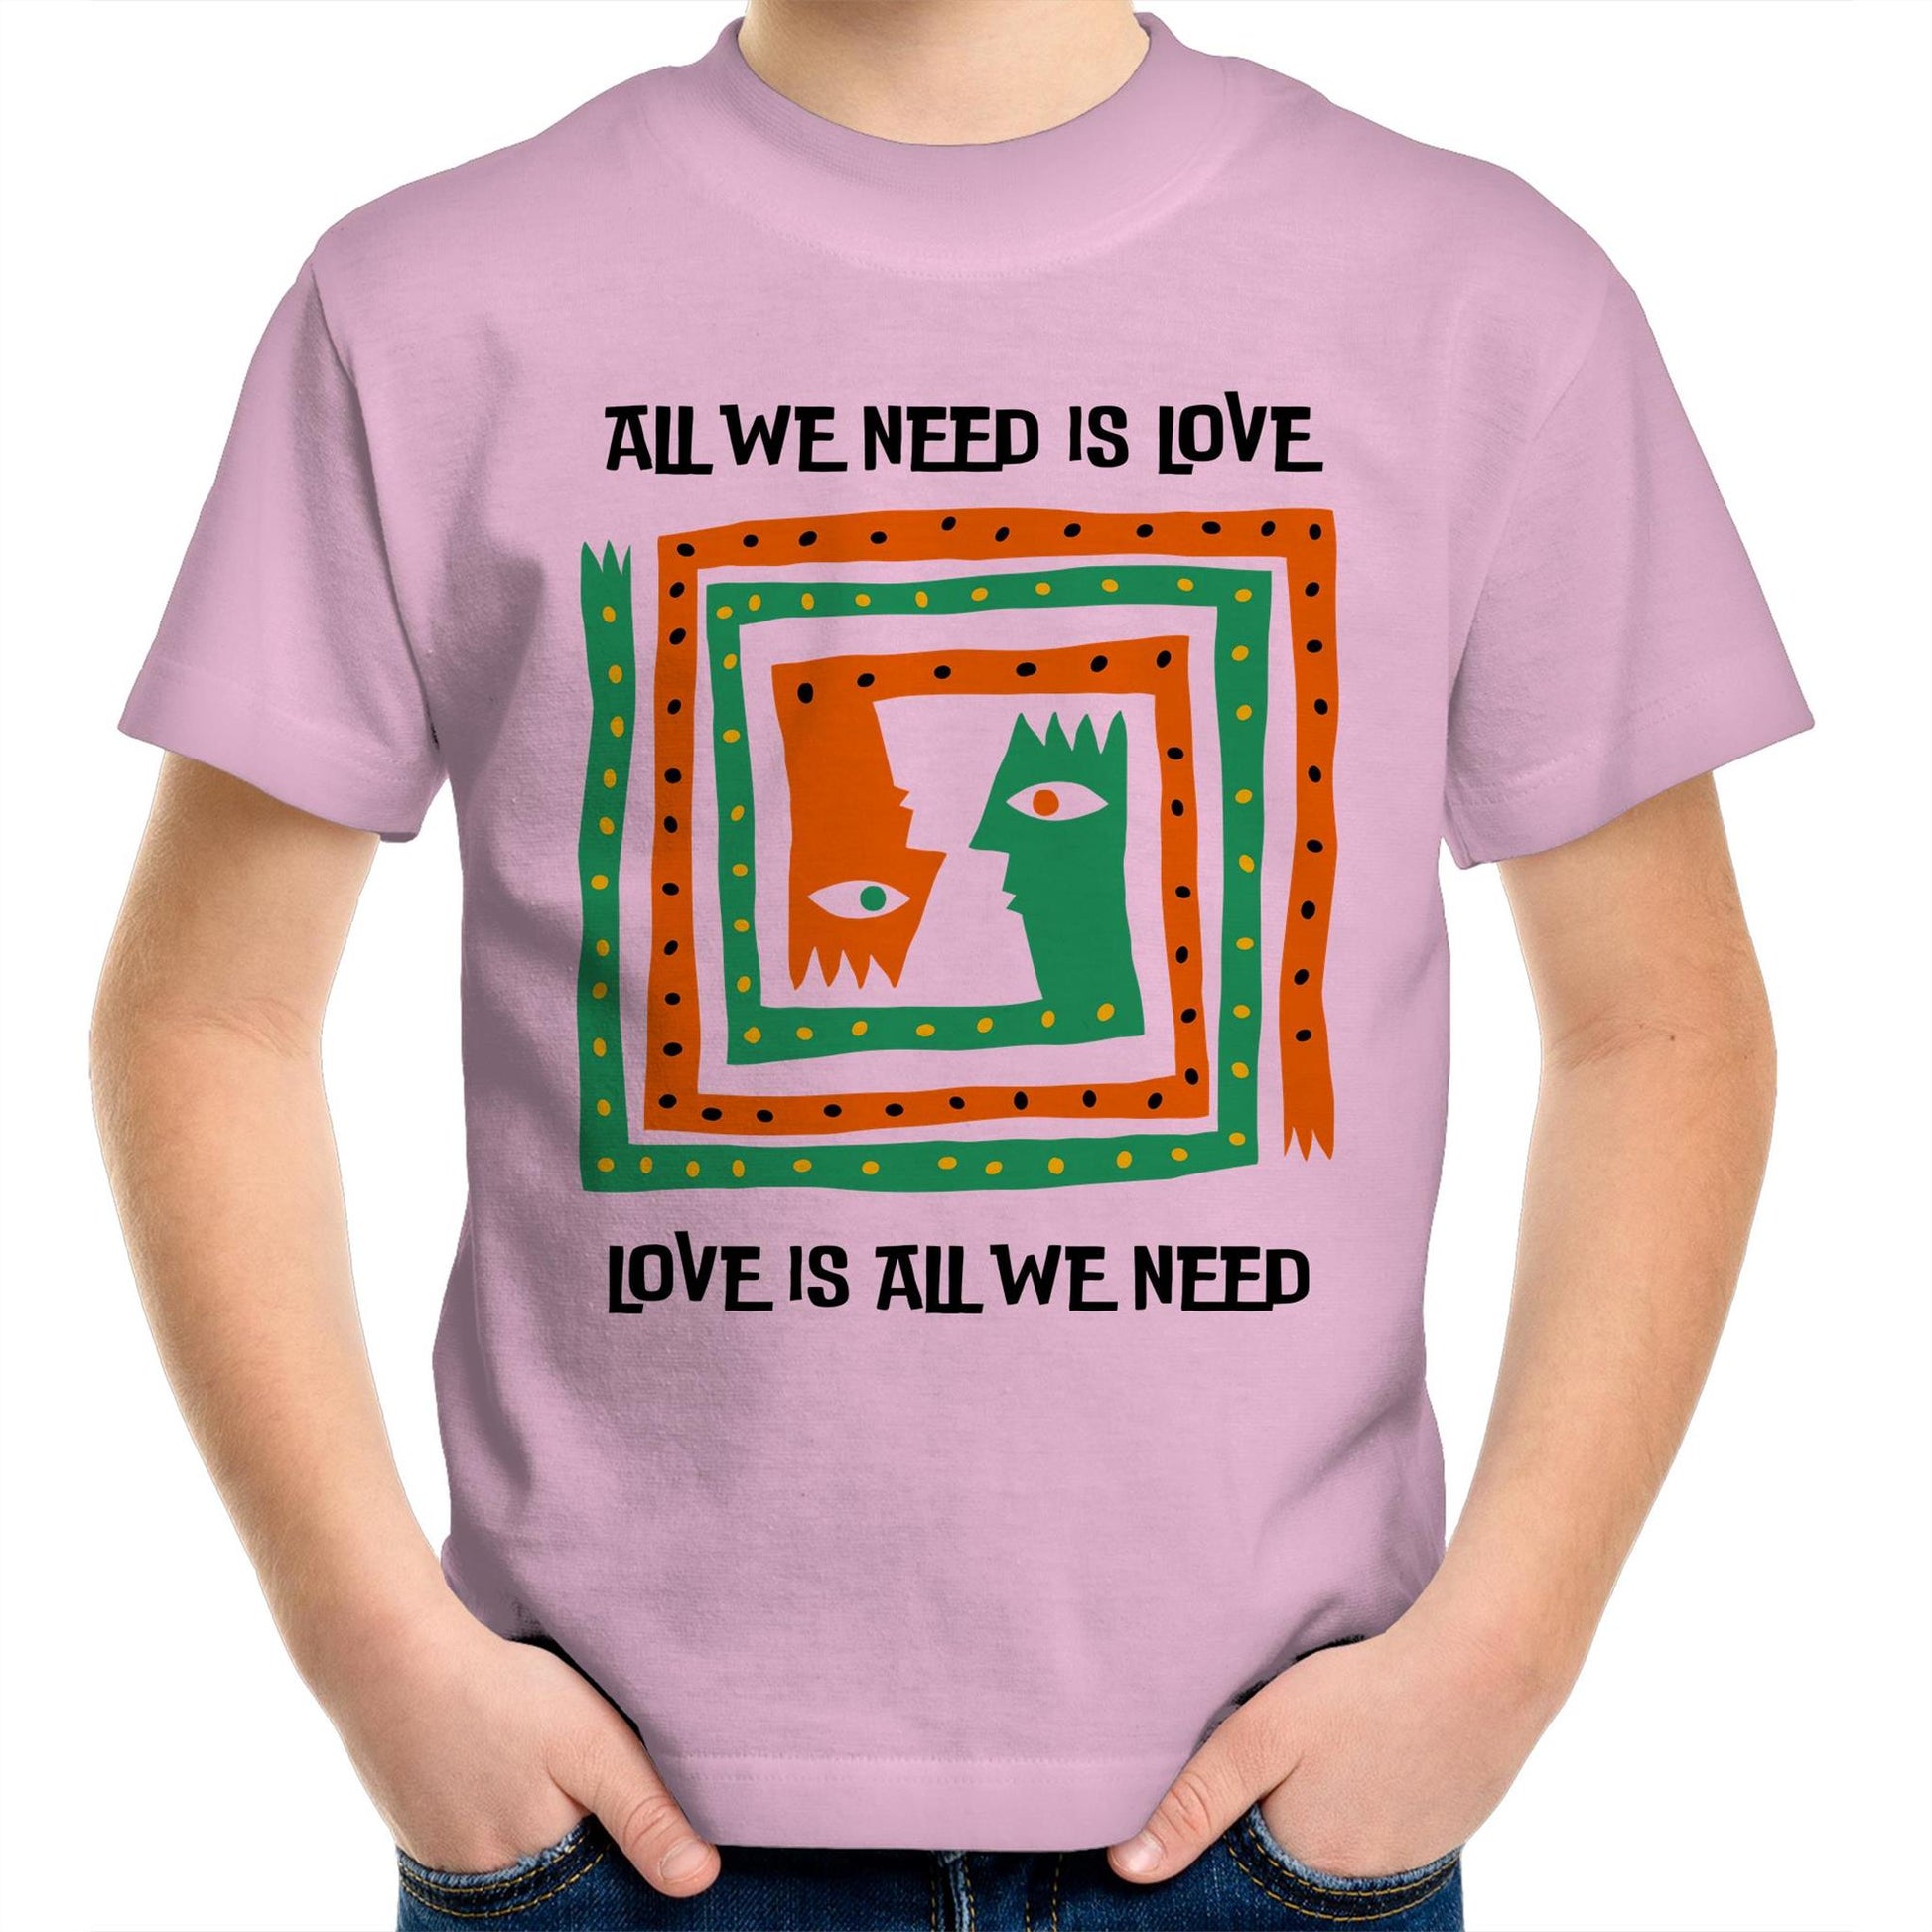 All We Need Is Love - Kids Youth T-Shirt Pink Kids Youth T-shirt